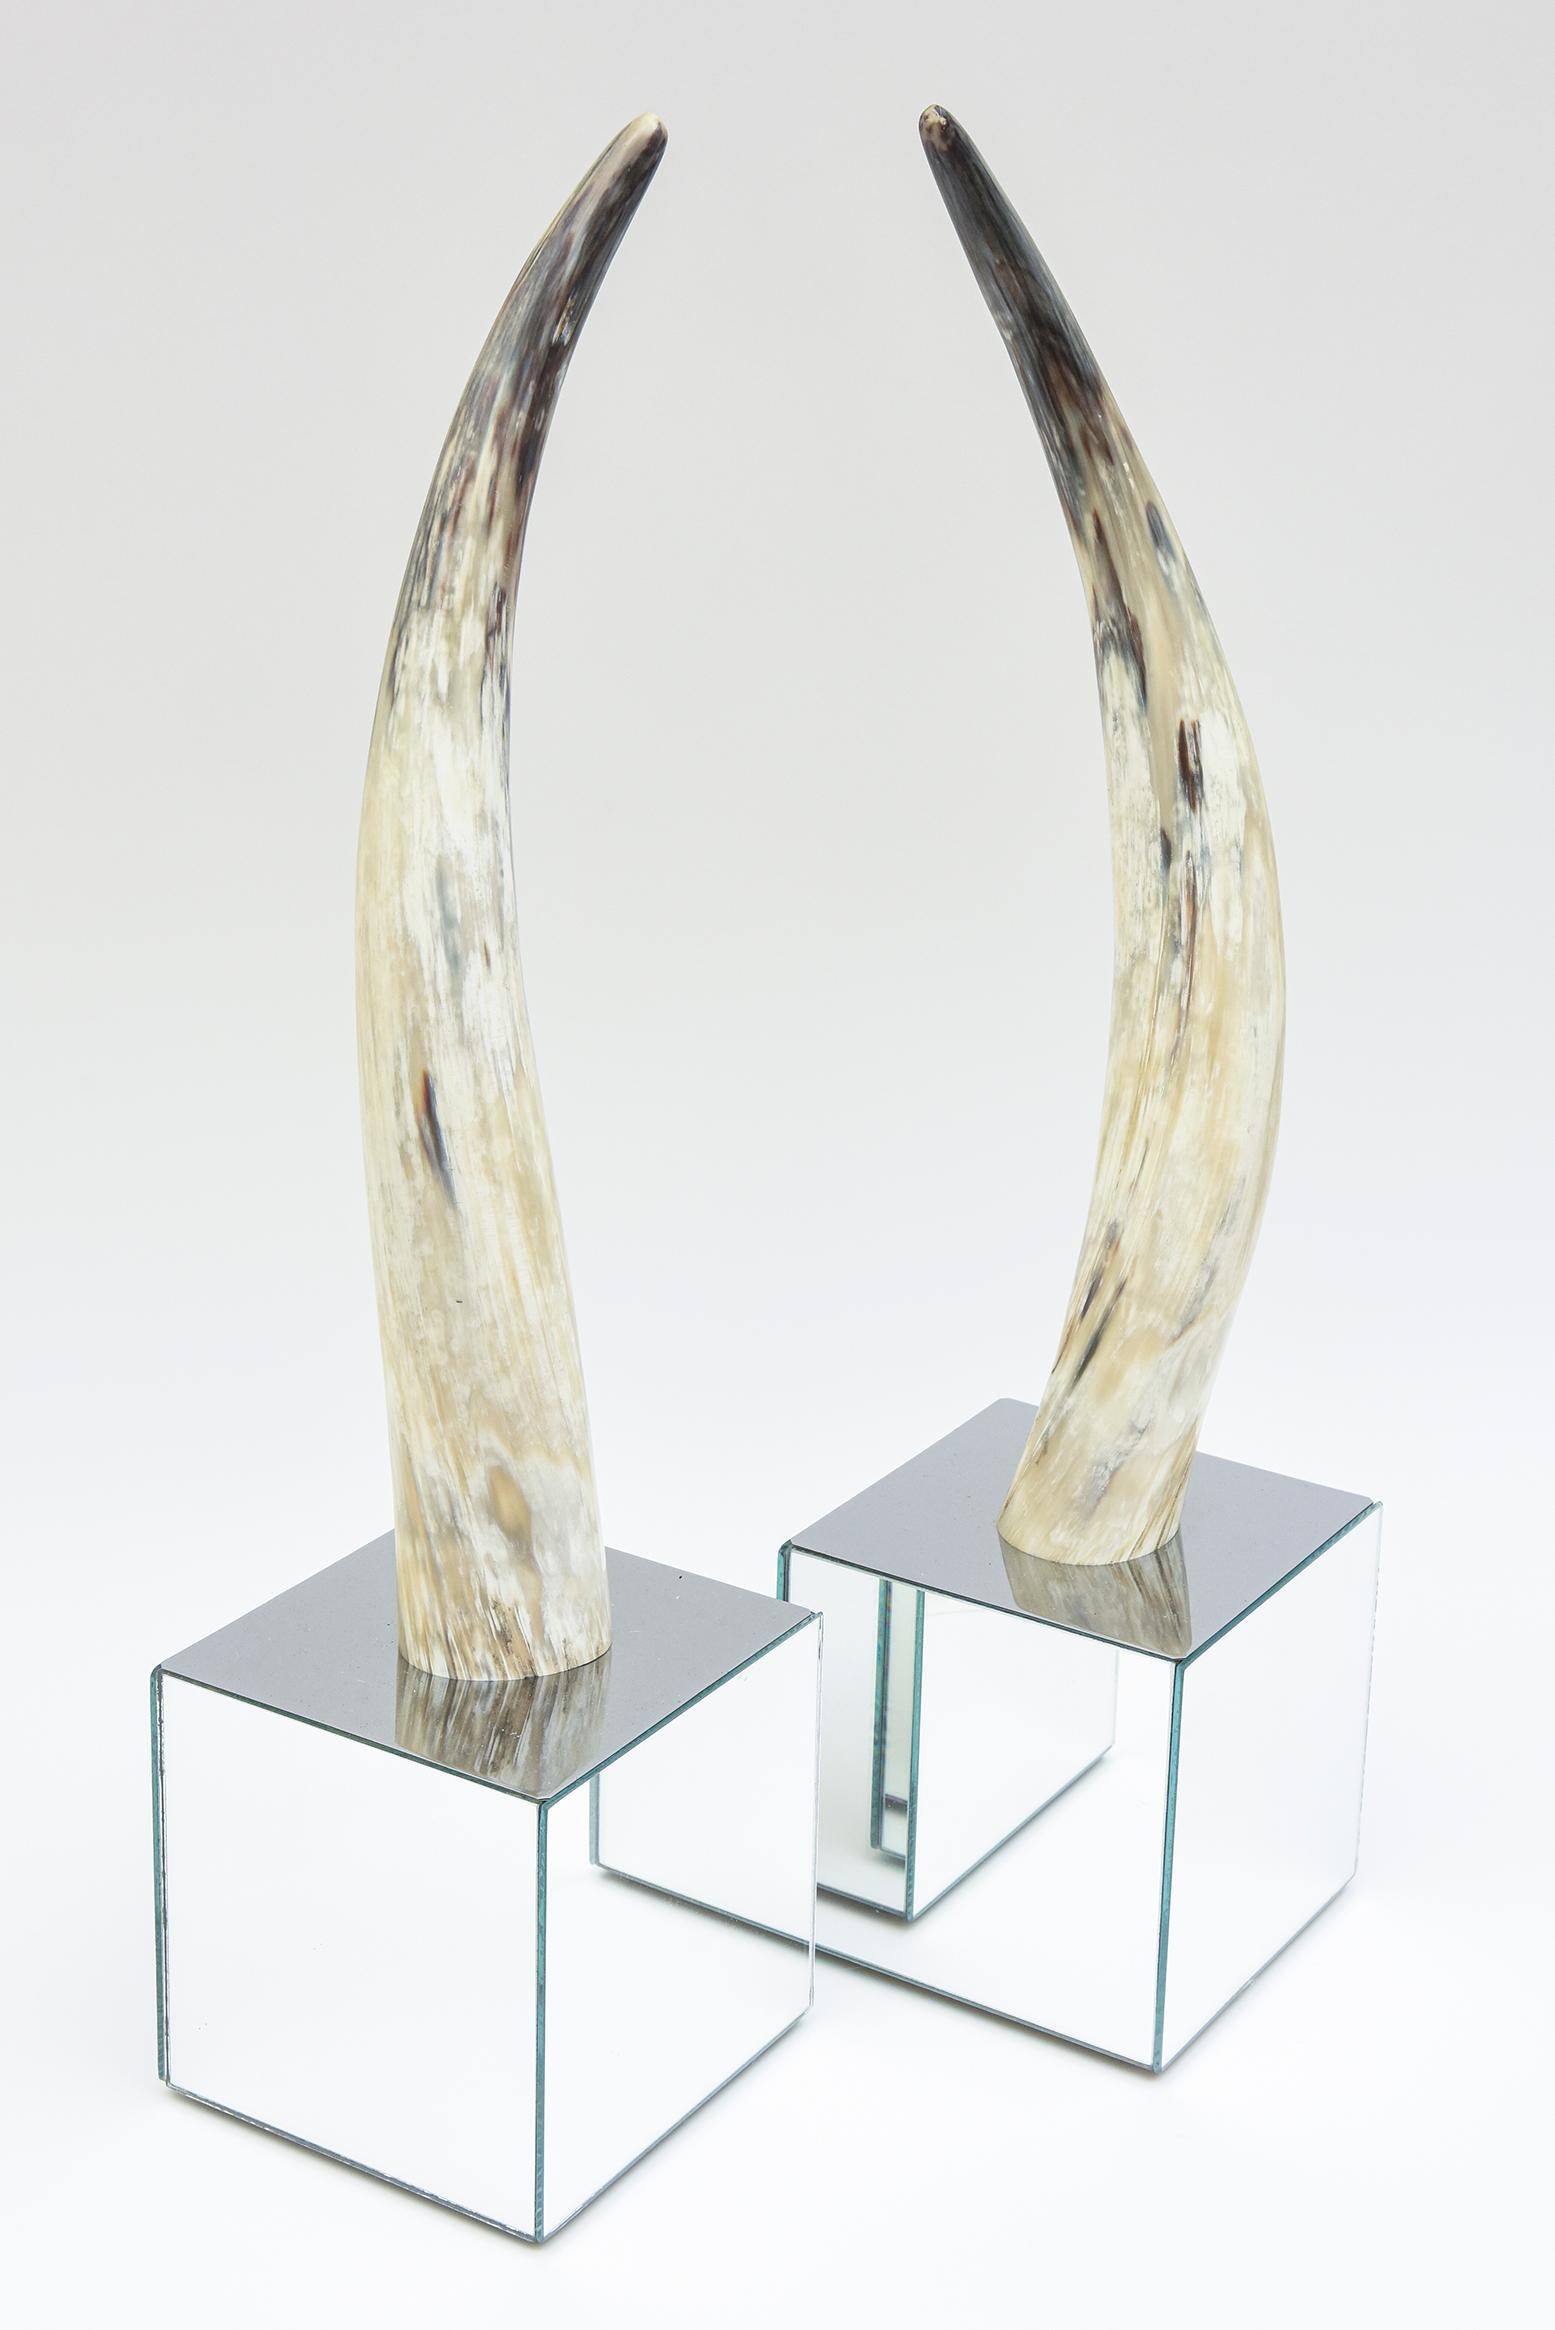 This lovely pair of curved horn and mirror base cube sculptures are from the 80's. The gradients of colors of the horn range from tan to off white to gray and slate gray and etc. The mirrored bases are 6.5